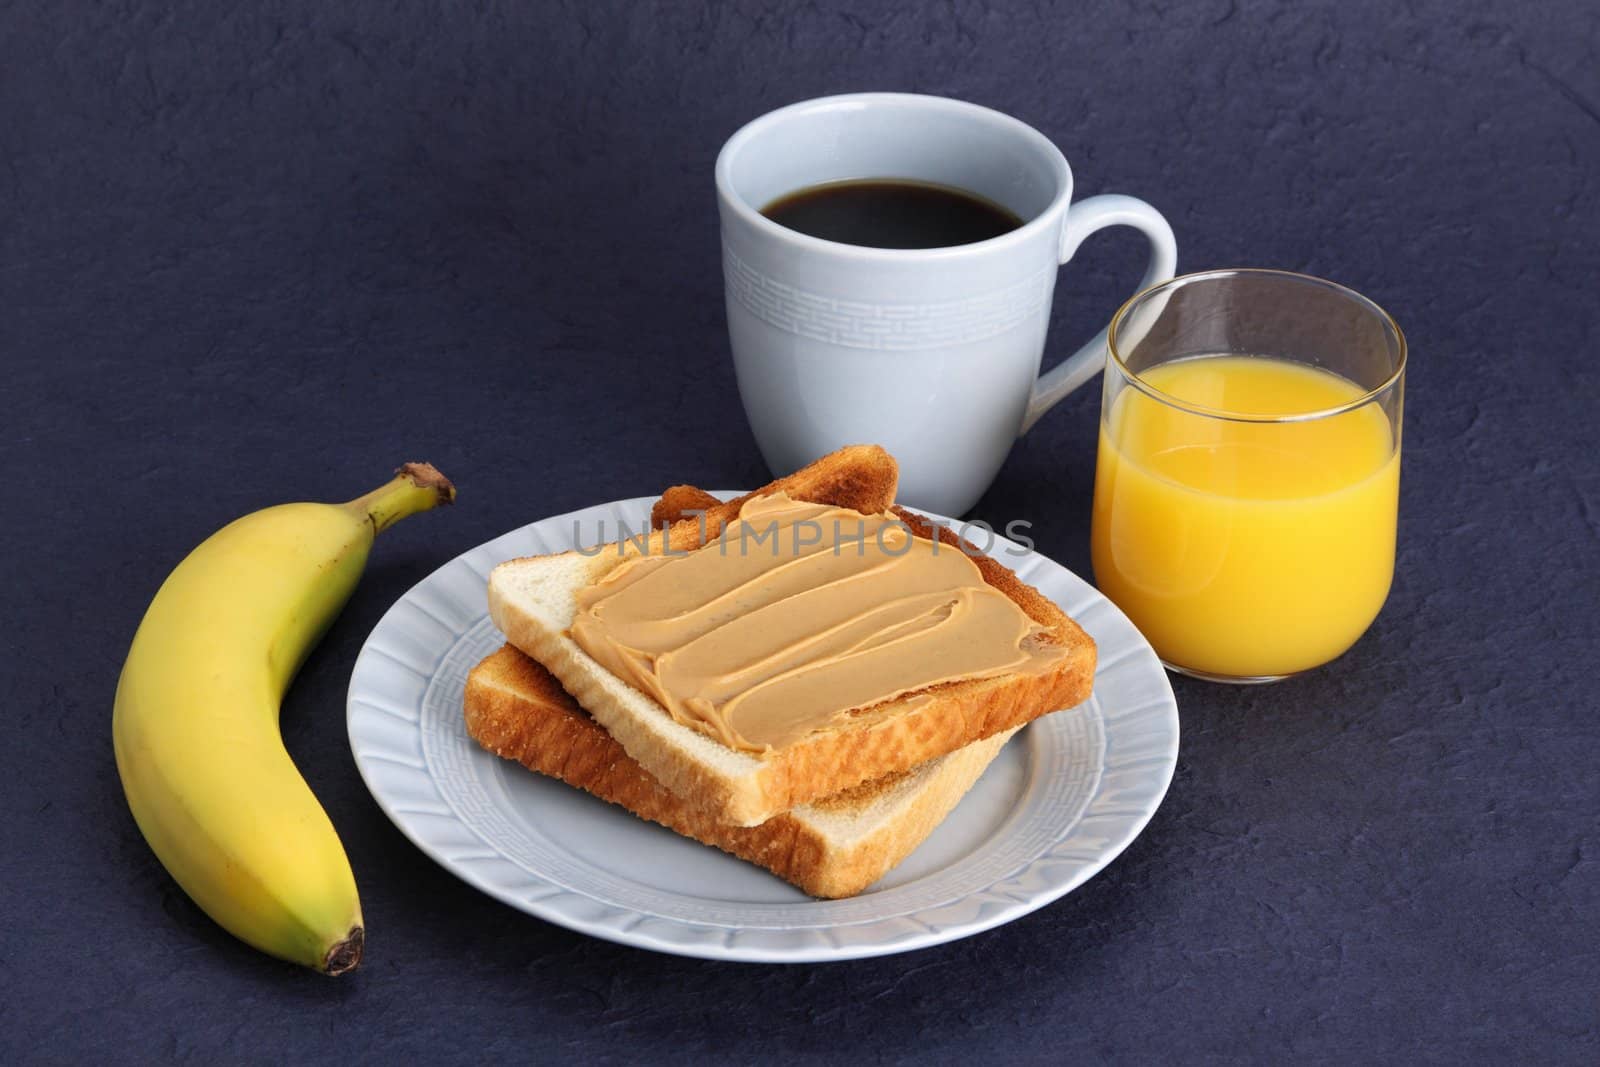 peanut butter toast in blue plate with orange juice, coffe and banana